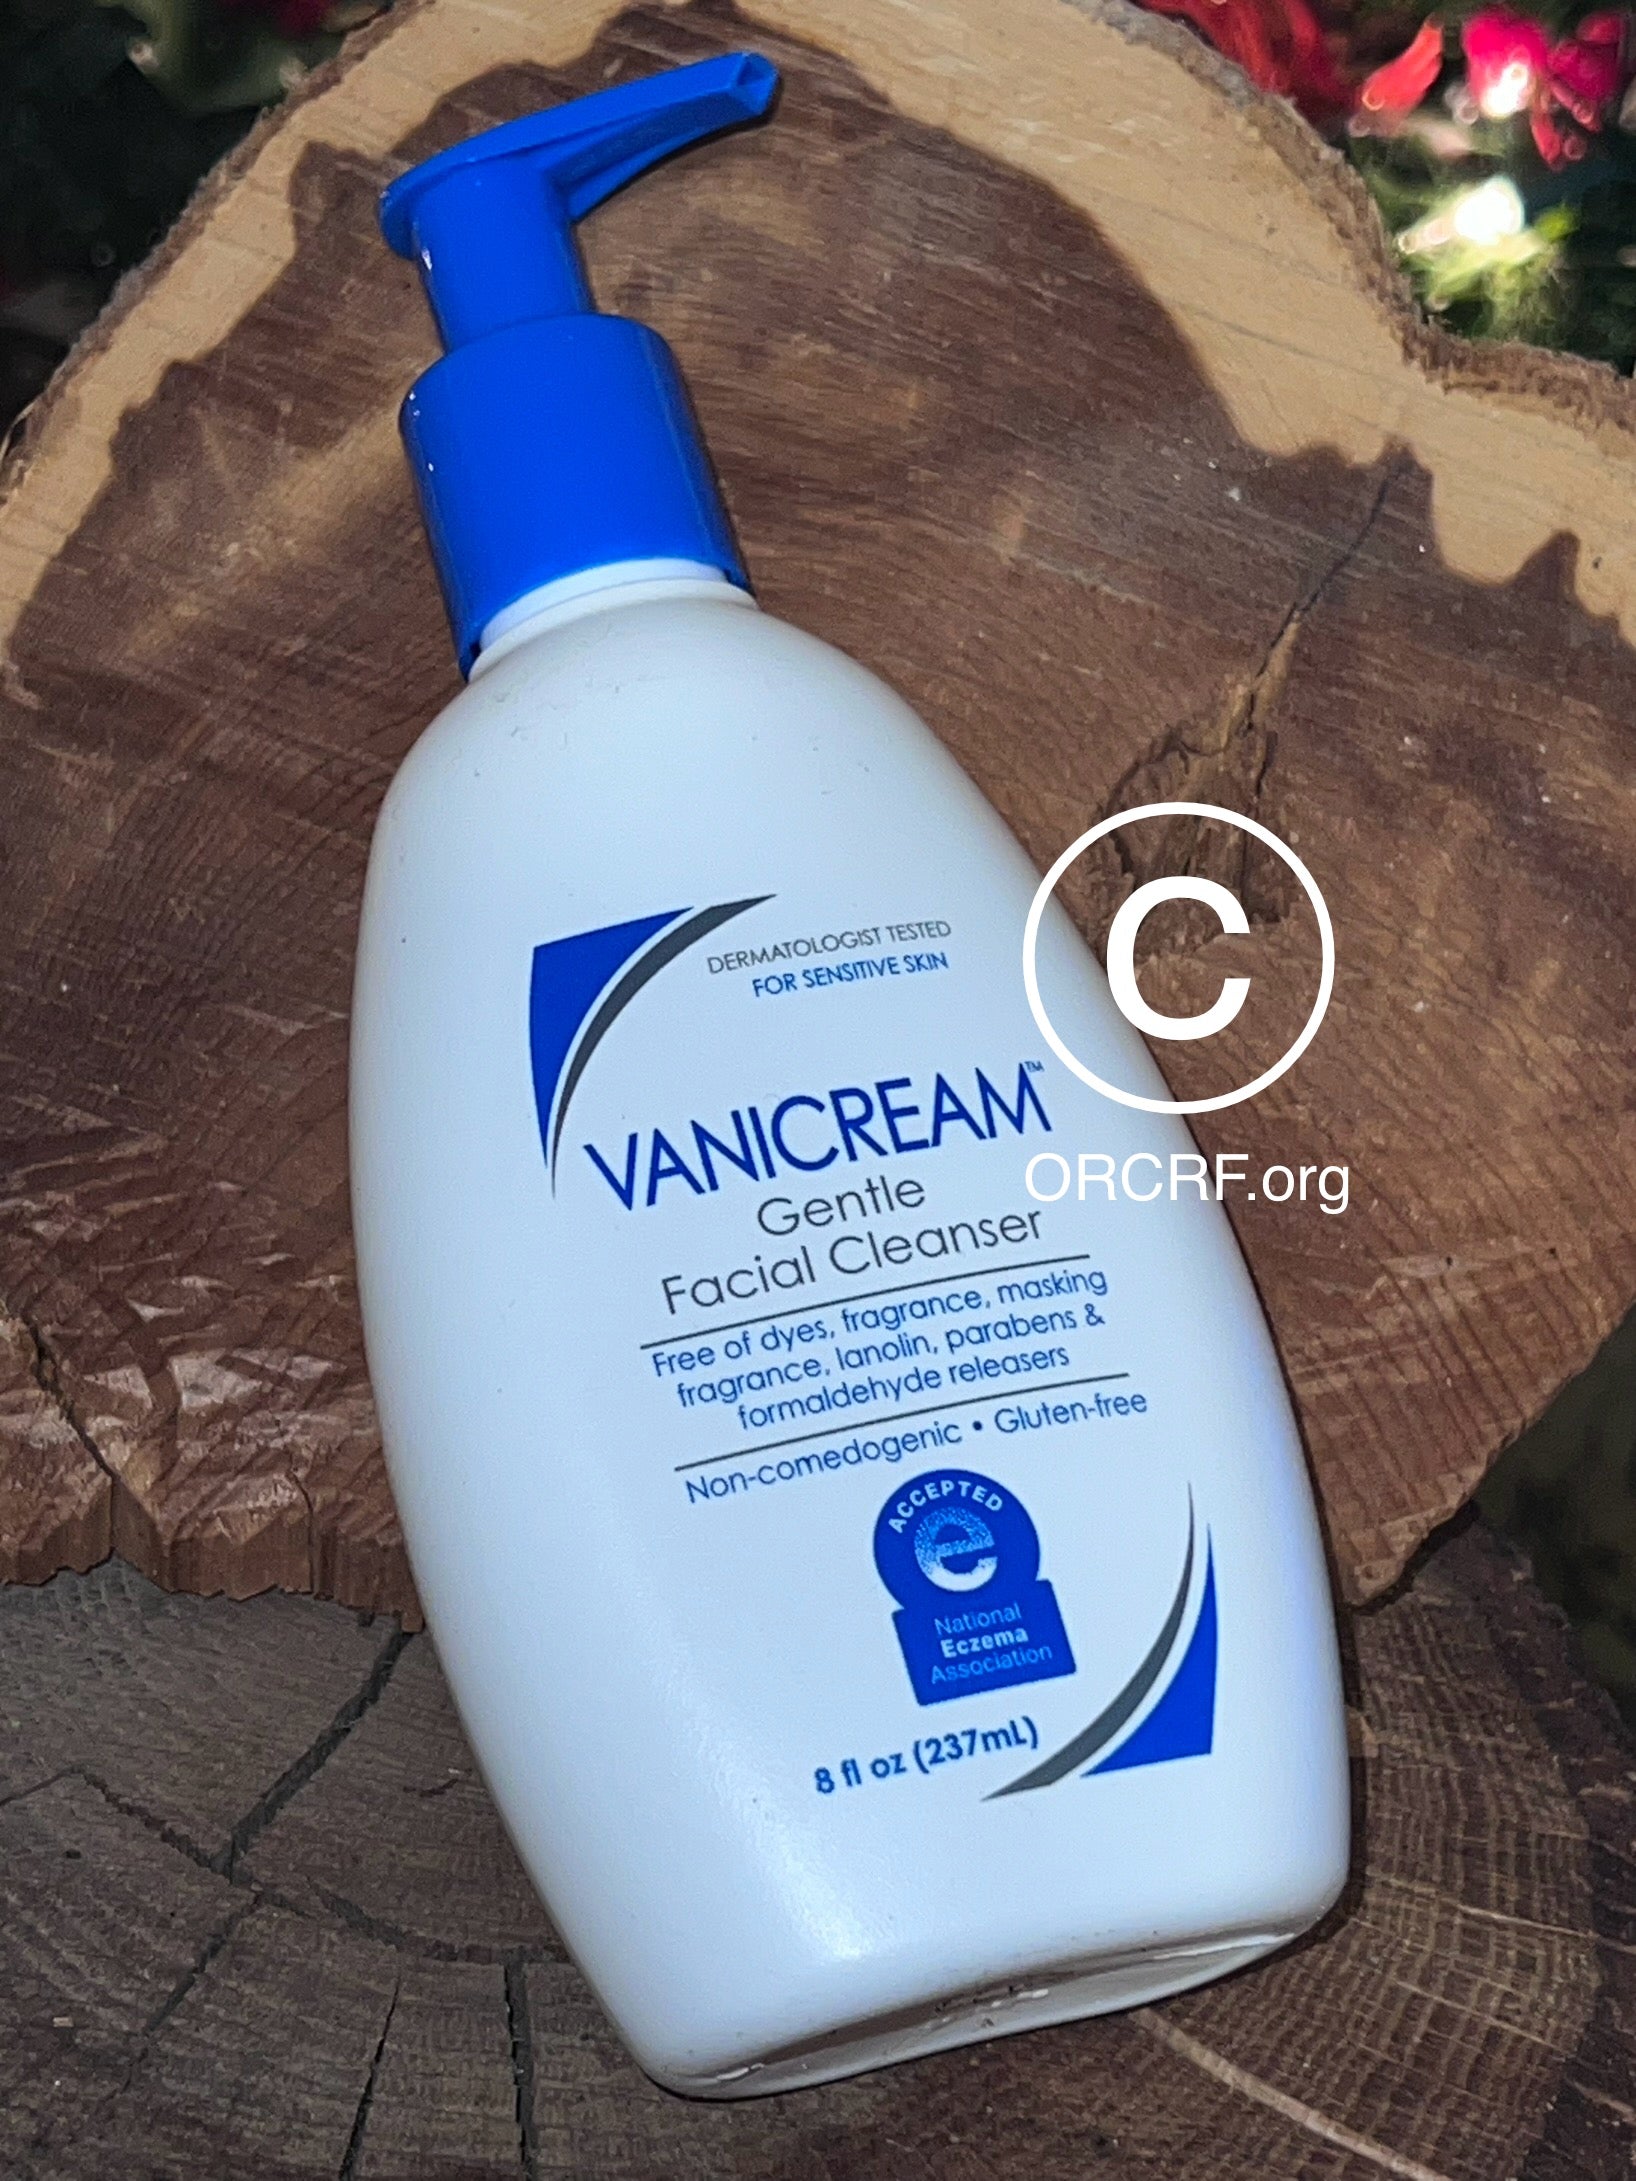 Vanicream GENTLE FACIAL CLEANSER with PUMP DISPENSER for SENSITIVE SKIN 8 fl oz Formulated Without Common Irritants for Those with Sensitive Skin - Supporting ORCRF.org